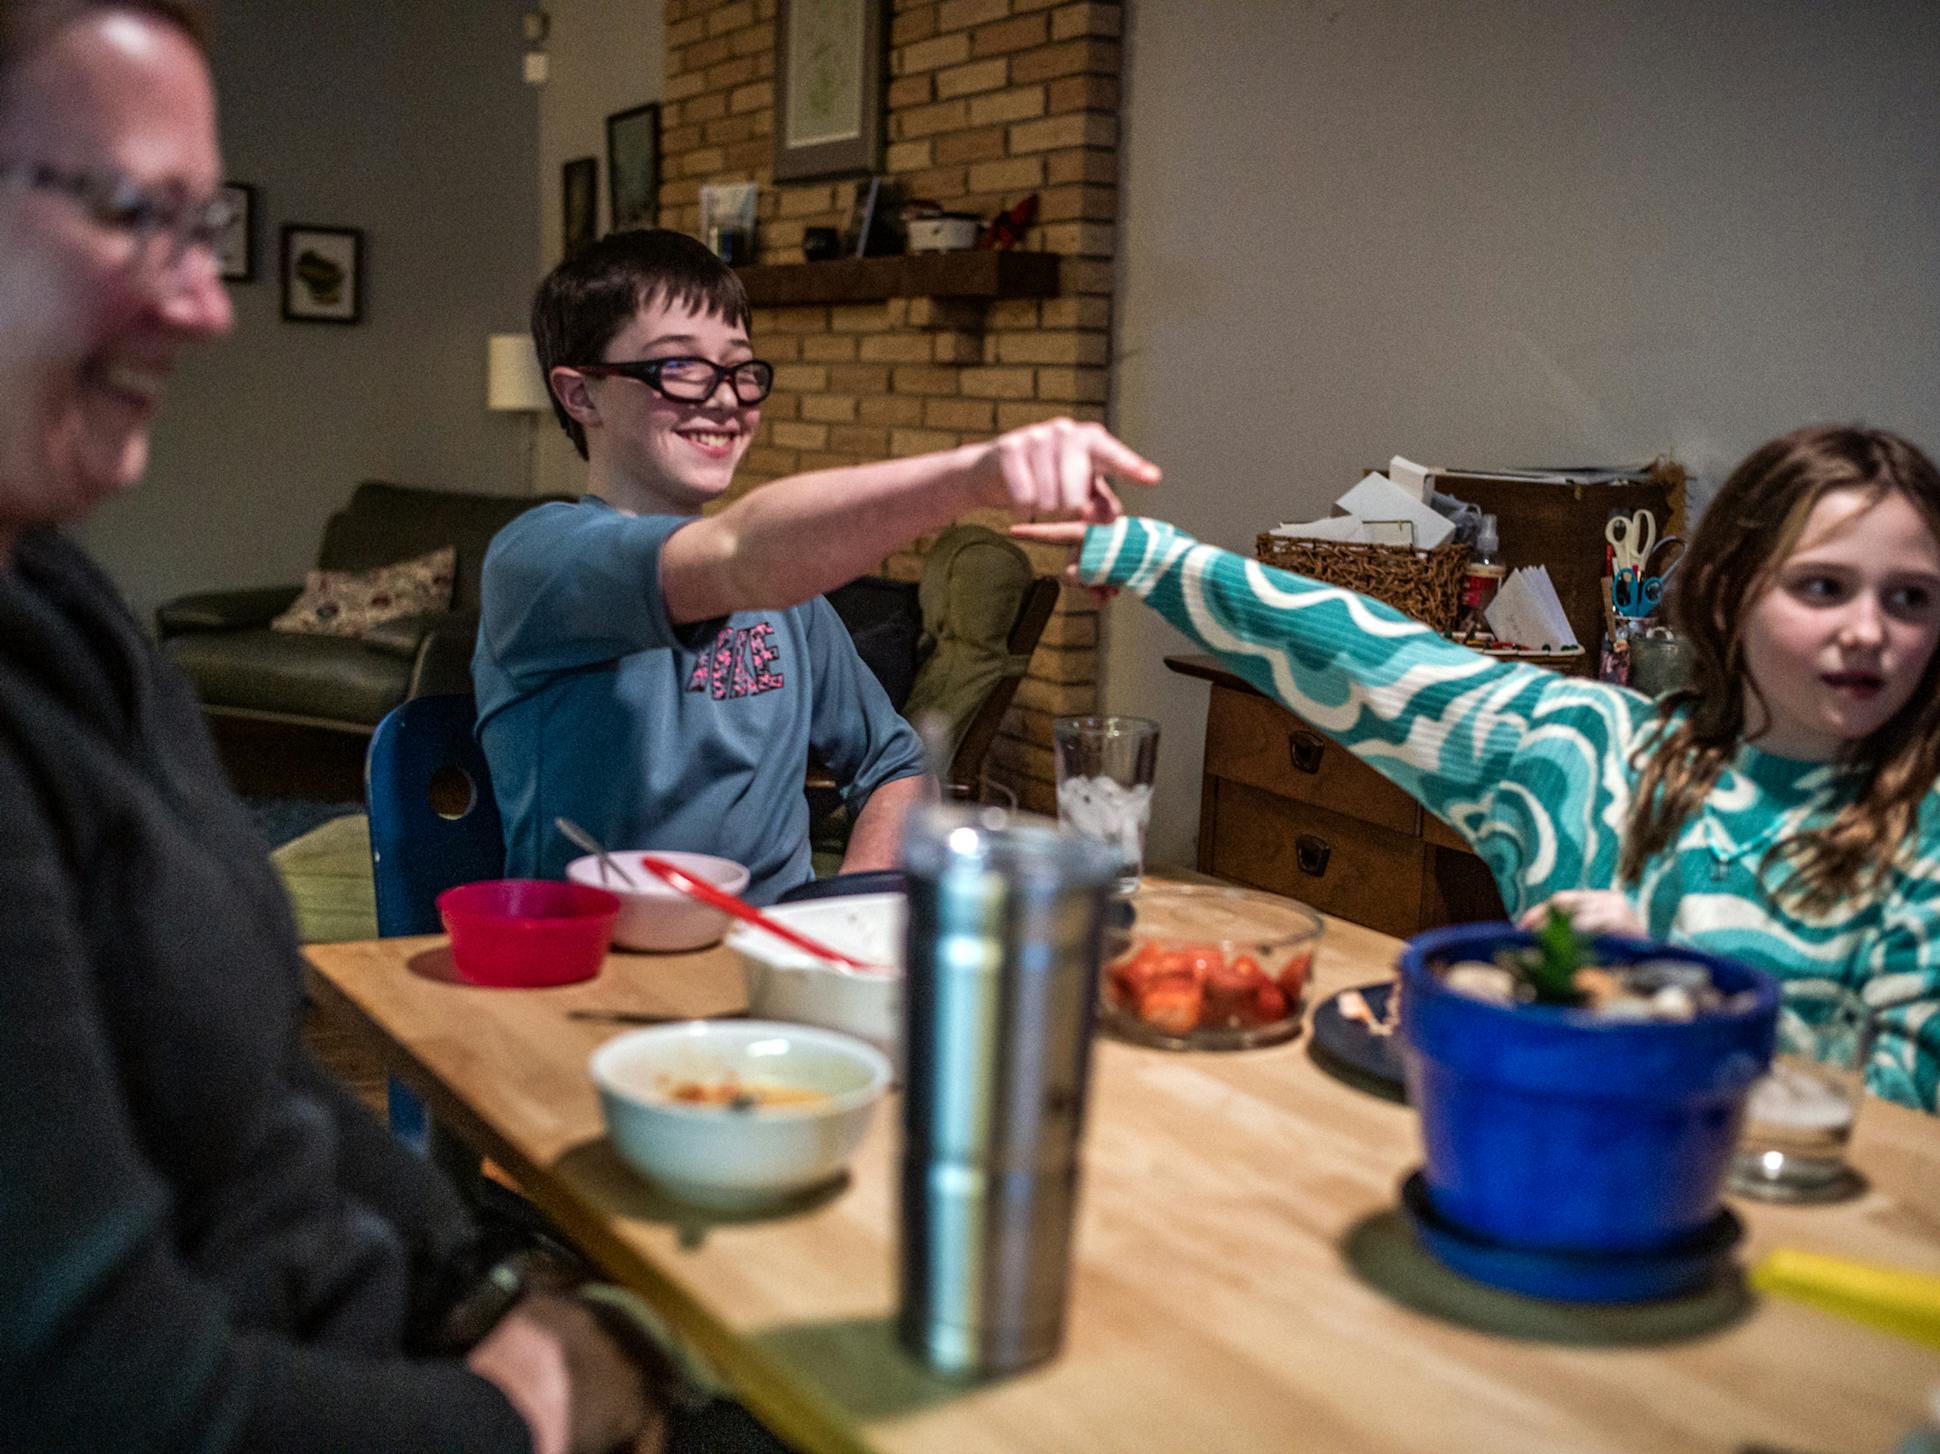 Harrison had dinner with his family, including mother Tara Dobbelaere, left, and sister Odessa, 11. He does well at school in an environment tailored for students with sensory needs.